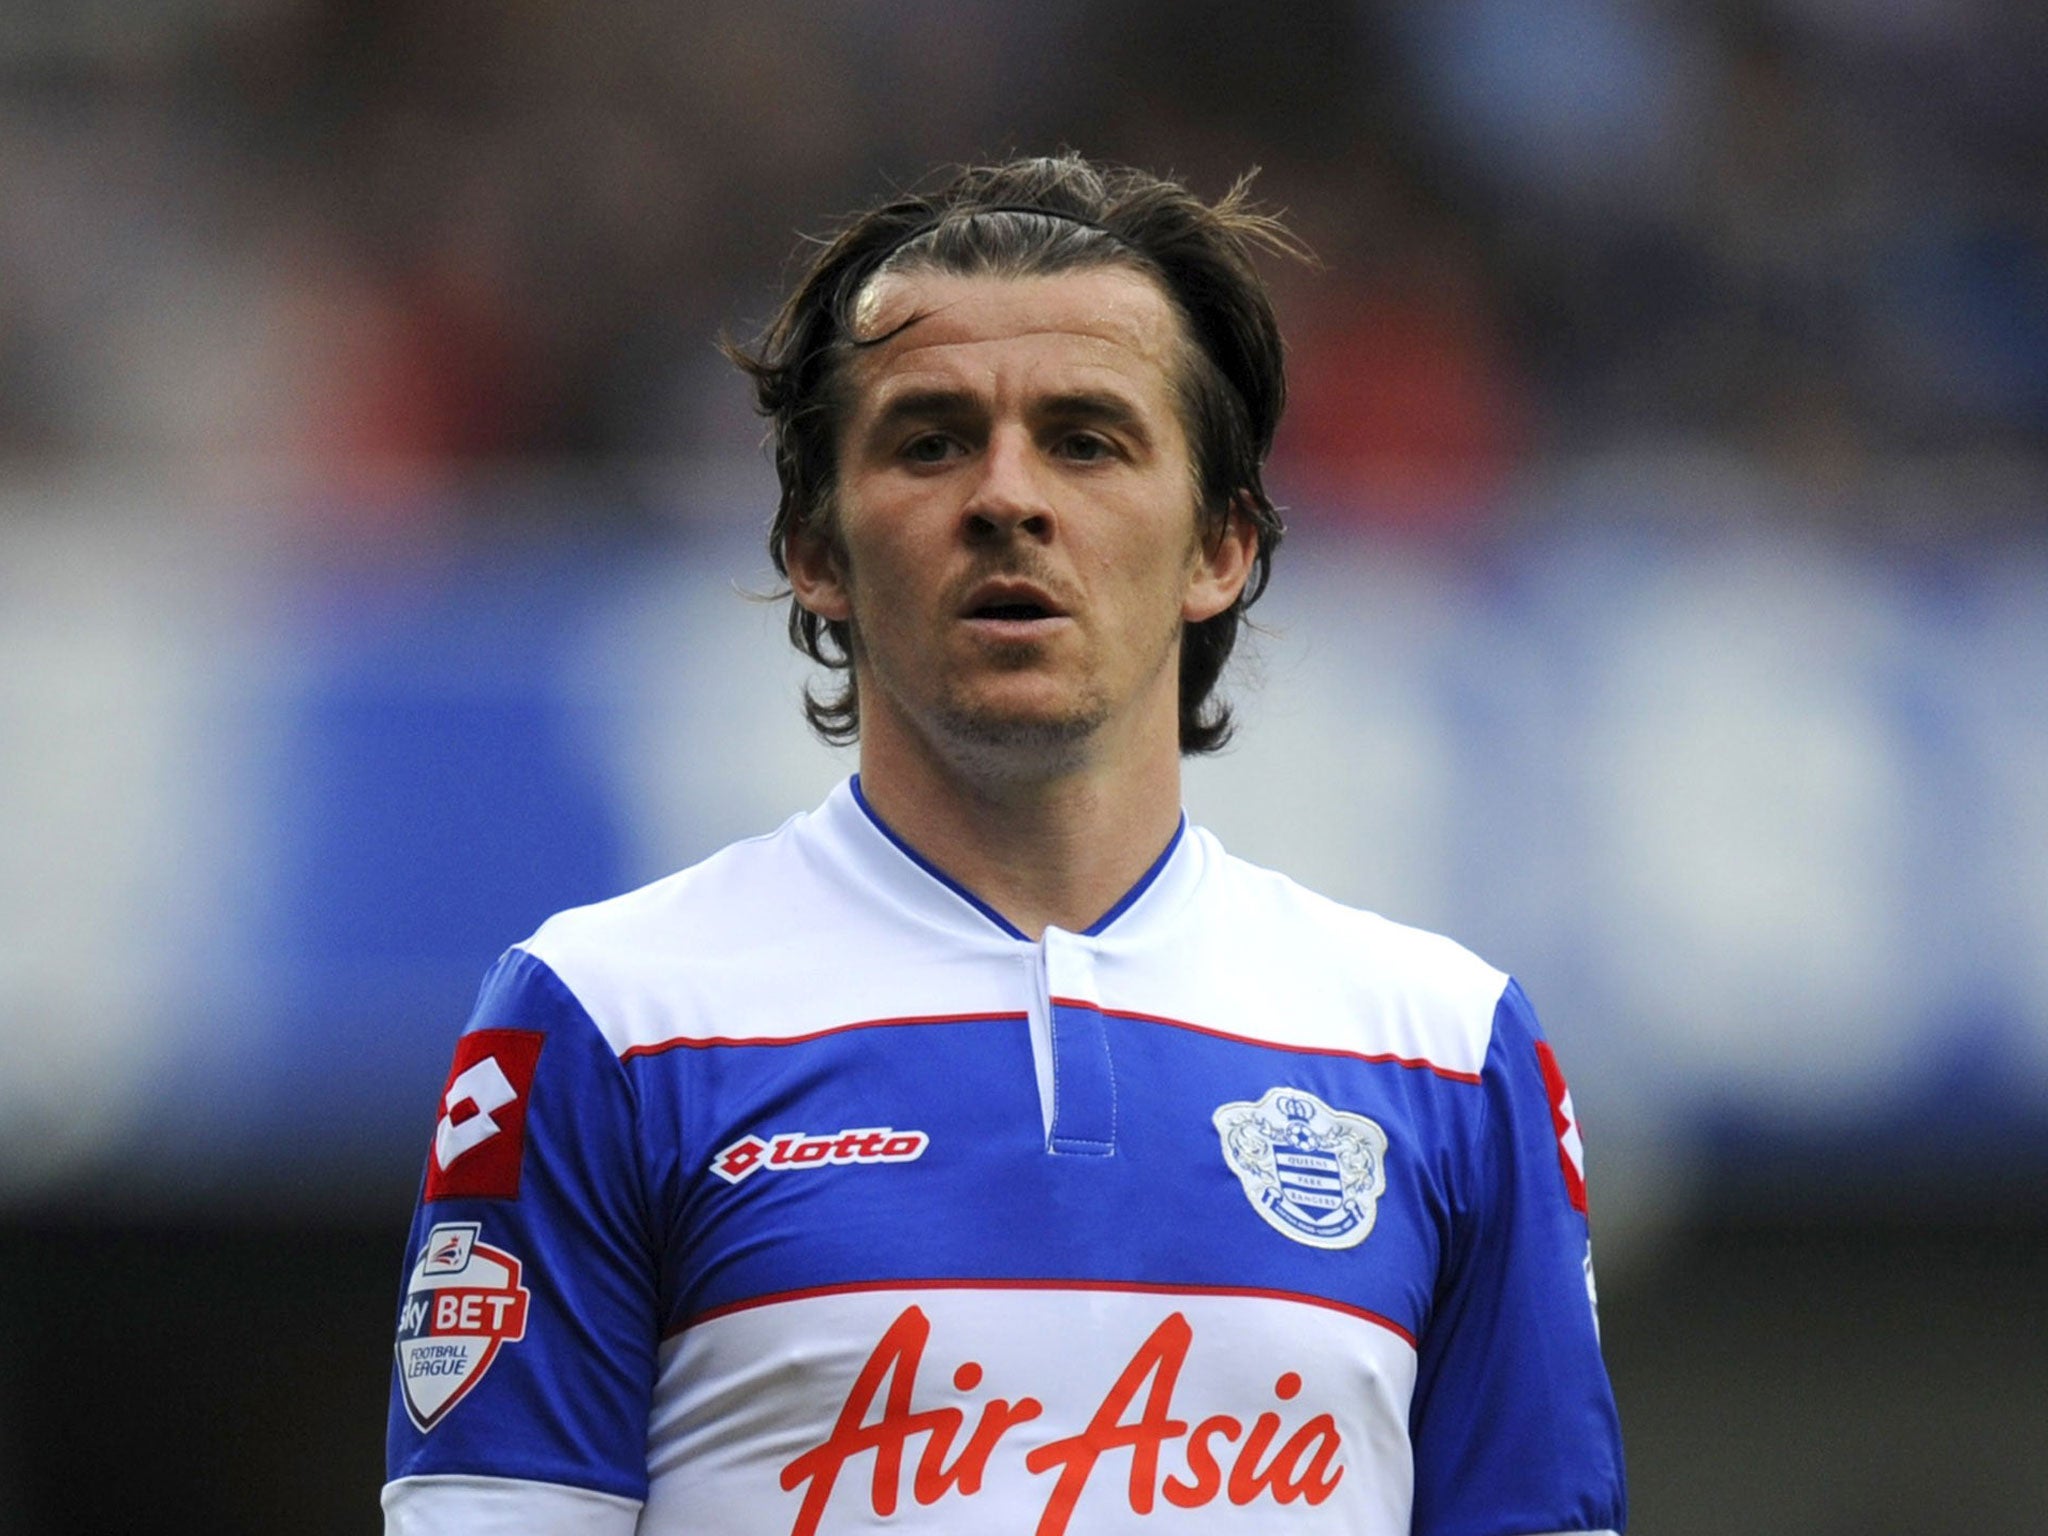 Joey Barton questioned the point of FA's commission and said the England team are 'shit'